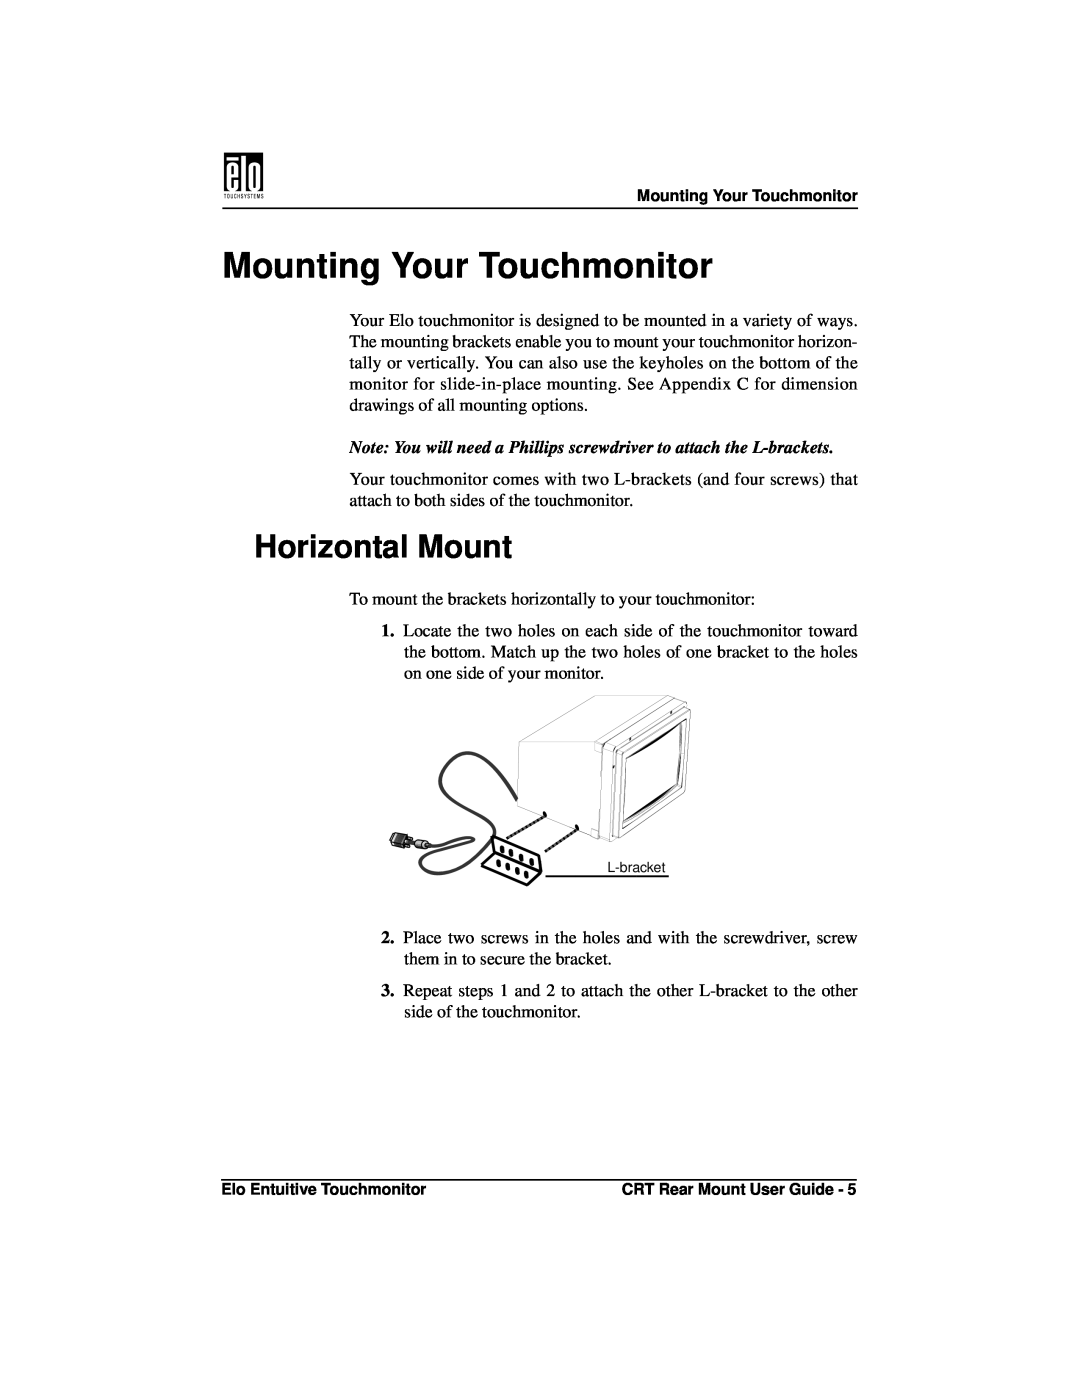 Elo TouchSystems ET1545C, ET1745C manual Mounting Your Touchmonitor, Horizontal Mount 